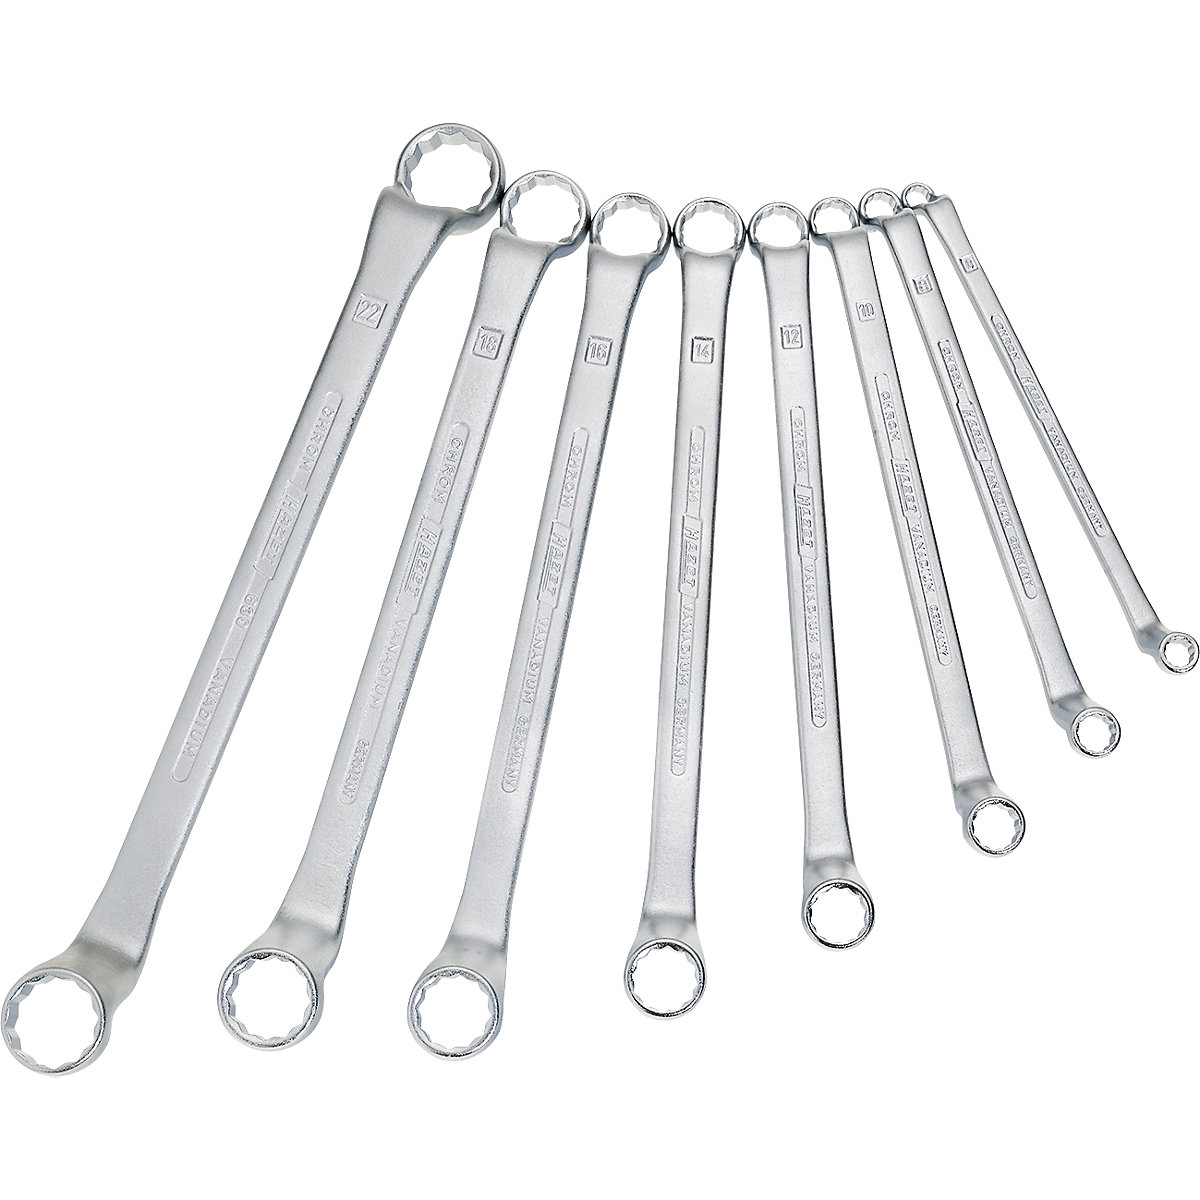 FLAT RING SPANNER SET - 0134S | Ring spanners | Wrenches | Hardware | Fervi  Pro smart equipment